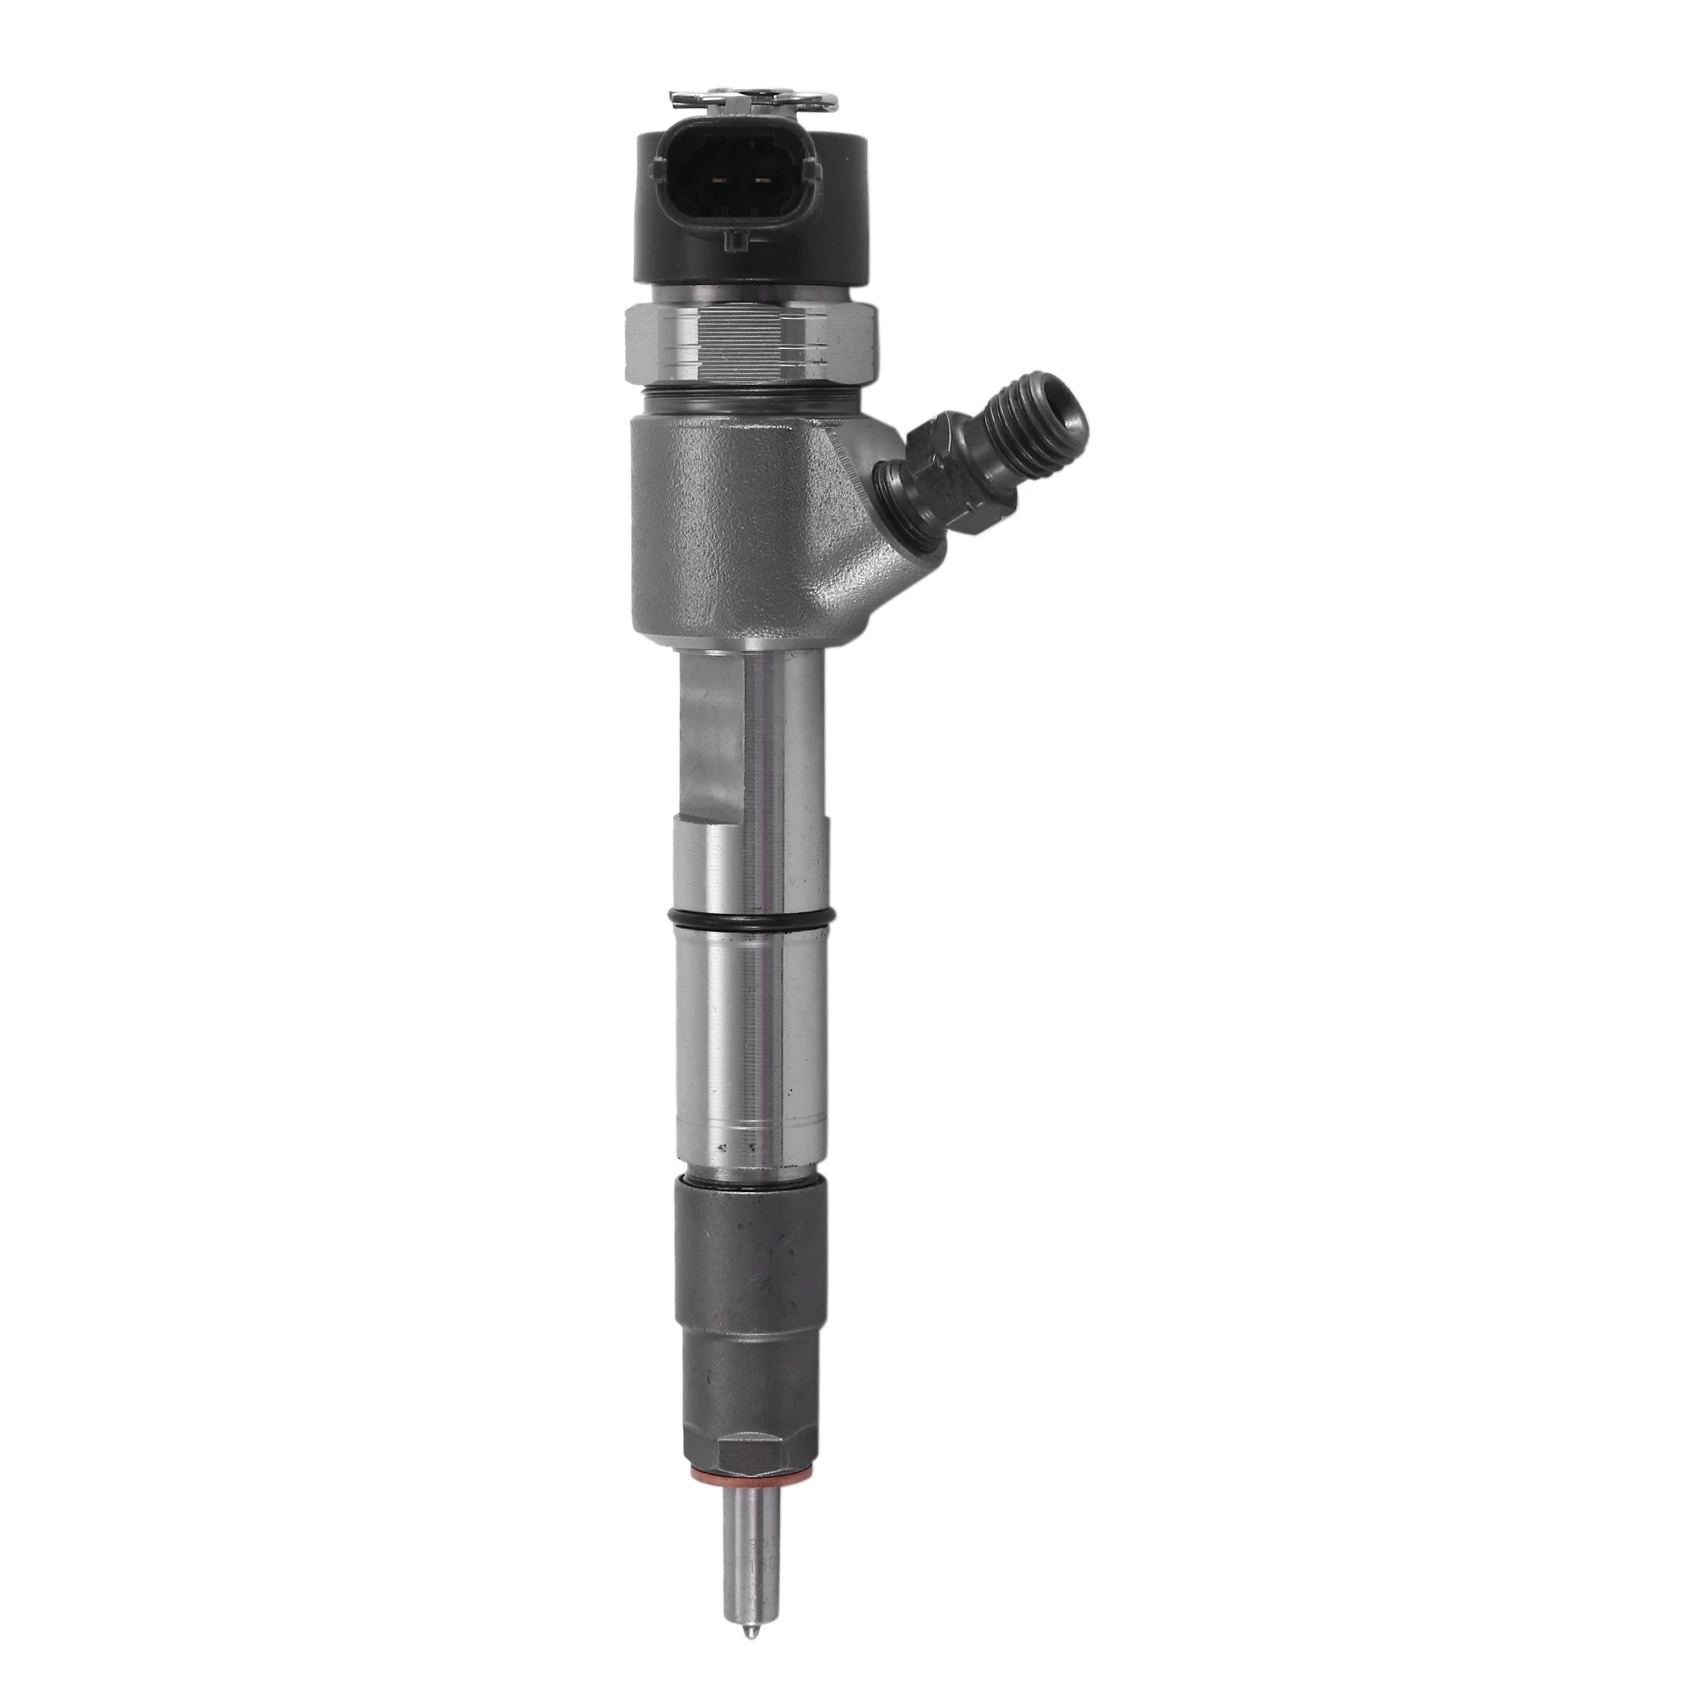 New Diesel Common Rail Fuel Injector Nozzle 0445110692